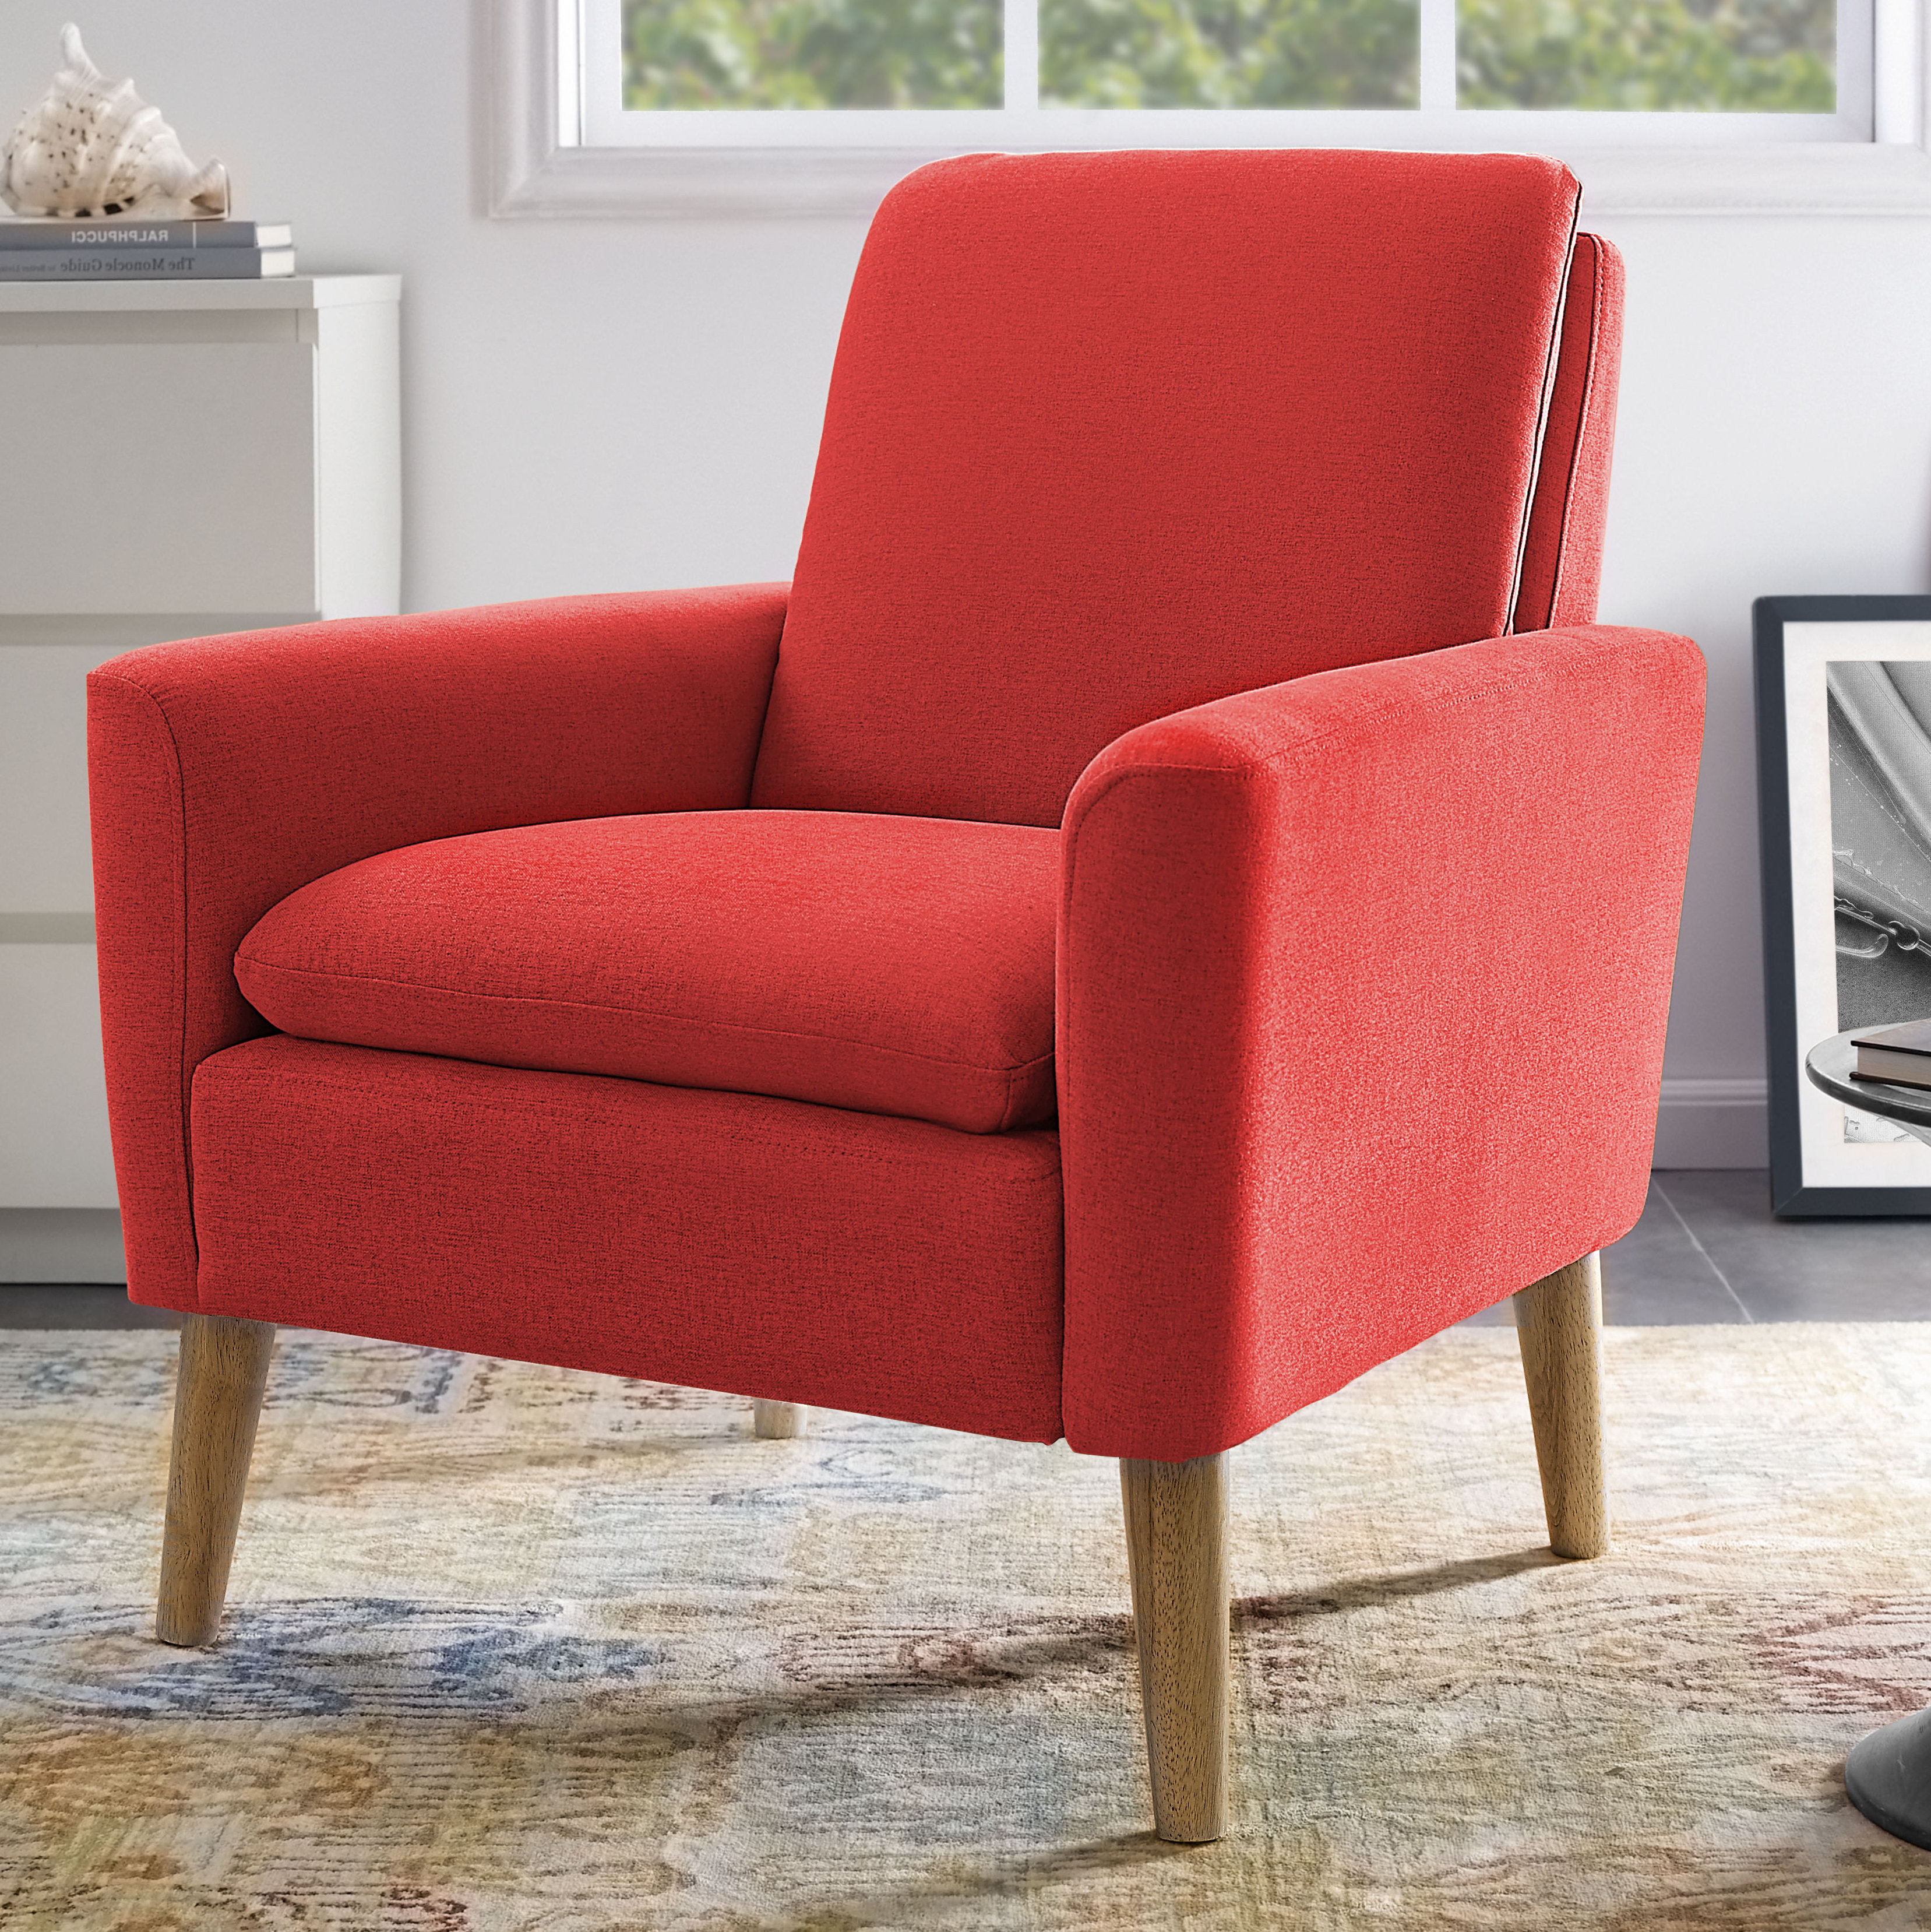 Armchairs for Your Living Room   Crate & Barrel